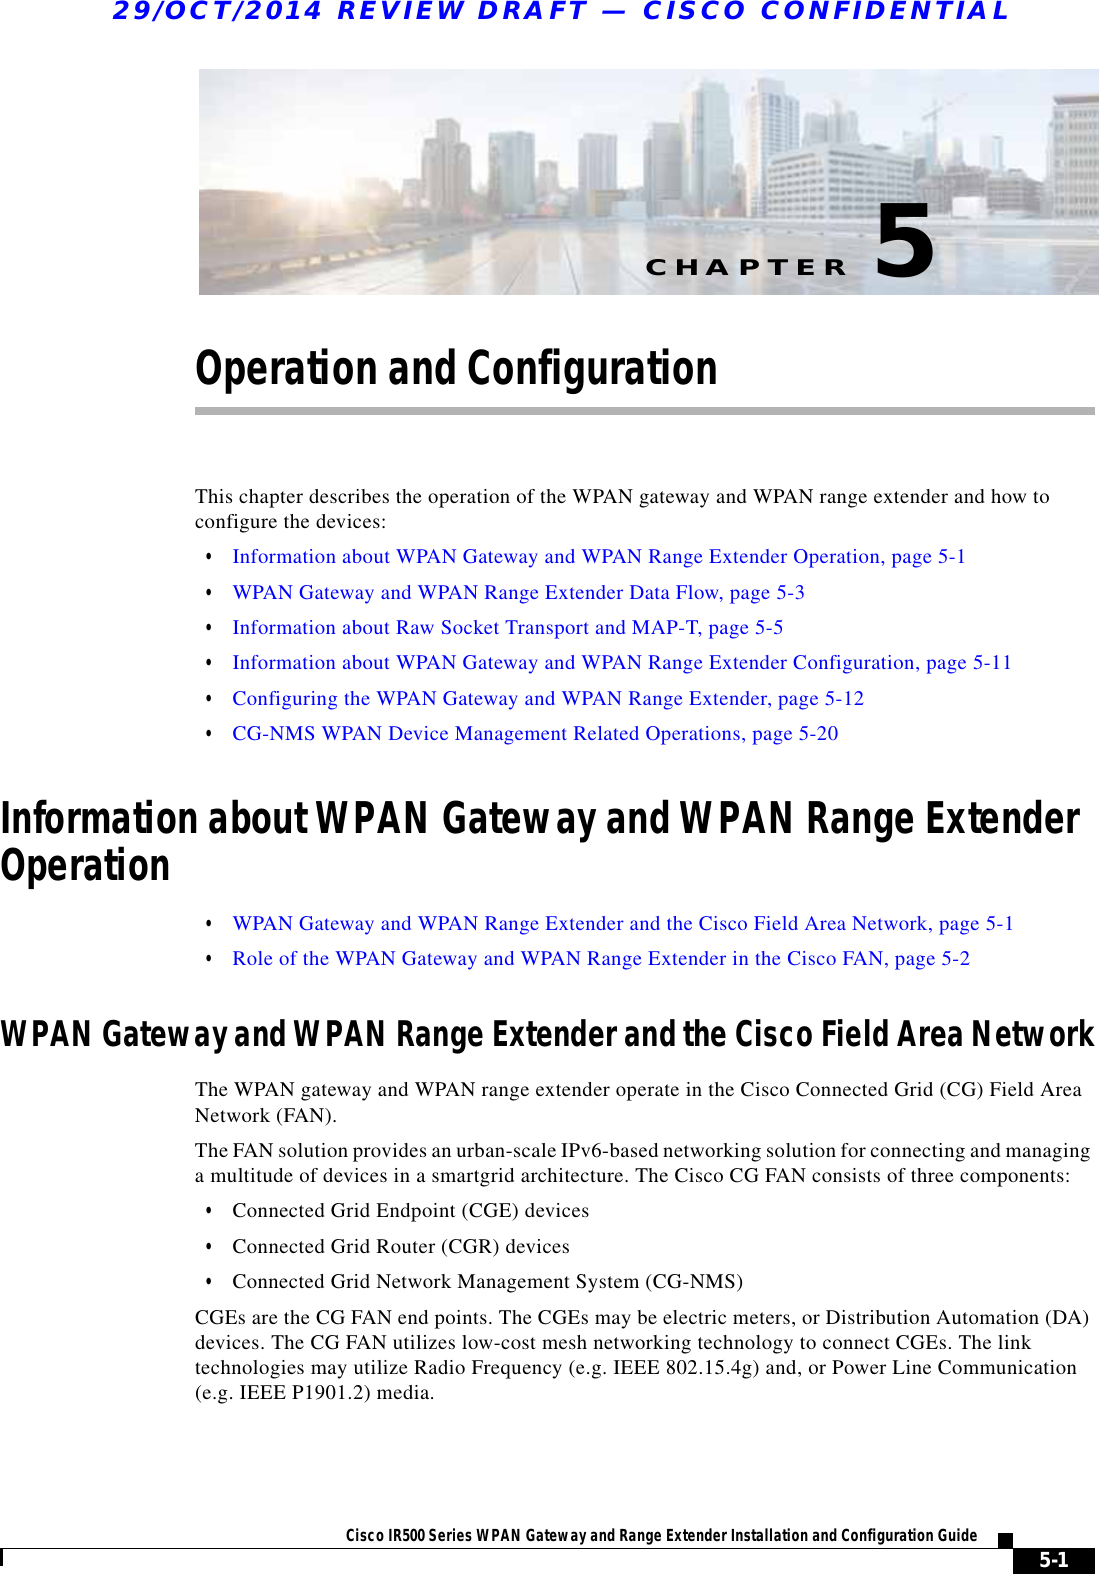 CHAPTER29/OCT/2014 REVIEW DRAFT — CISCO CONFIDENTIAL5-1Cisco IR500 Series WPAN Gateway and Range Extender Installation and Configuration Guide 5Operation and ConfigurationThis chapter describes the operation of the WPAN gateway and WPAN range extender and how to configure the devices:  • Information about WPAN Gateway and WPAN Range Extender Operation, page 5-1  • WPAN Gateway and WPAN Range Extender Data Flow, page 5-3  • Information about Raw Socket Transport and MAP-T, page 5-5  • Information about WPAN Gateway and WPAN Range Extender Configuration, page 5-11  • Configuring the WPAN Gateway and WPAN Range Extender, page 5-12  • CG-NMS WPAN Device Management Related Operations, page 5-20Information about WPAN Gateway and WPAN Range Extender Operation  • WPAN Gateway and WPAN Range Extender and the Cisco Field Area Network, page 5-1  • Role of the WPAN Gateway and WPAN Range Extender in the Cisco FAN, page 5-2WPAN Gateway and WPAN Range Extender and the Cisco Field Area NetworkThe WPAN gateway and WPAN range extender operate in the Cisco Connected Grid (CG) Field Area Network (FAN). The FAN solution provides an urban-scale IPv6-based networking solution for connecting and managing a multitude of devices in a smartgrid architecture. The Cisco CG FAN consists of three components:  • Connected Grid Endpoint (CGE) devices  • Connected Grid Router (CGR) devices  • Connected Grid Network Management System (CG-NMS)CGEs are the CG FAN end points. The CGEs may be electric meters, or Distribution Automation (DA) devices. The CG FAN utilizes low-cost mesh networking technology to connect CGEs. The link technologies may utilize Radio Frequency (e.g. IEEE 802.15.4g) and, or Power Line Communication (e.g. IEEE P1901.2) media.